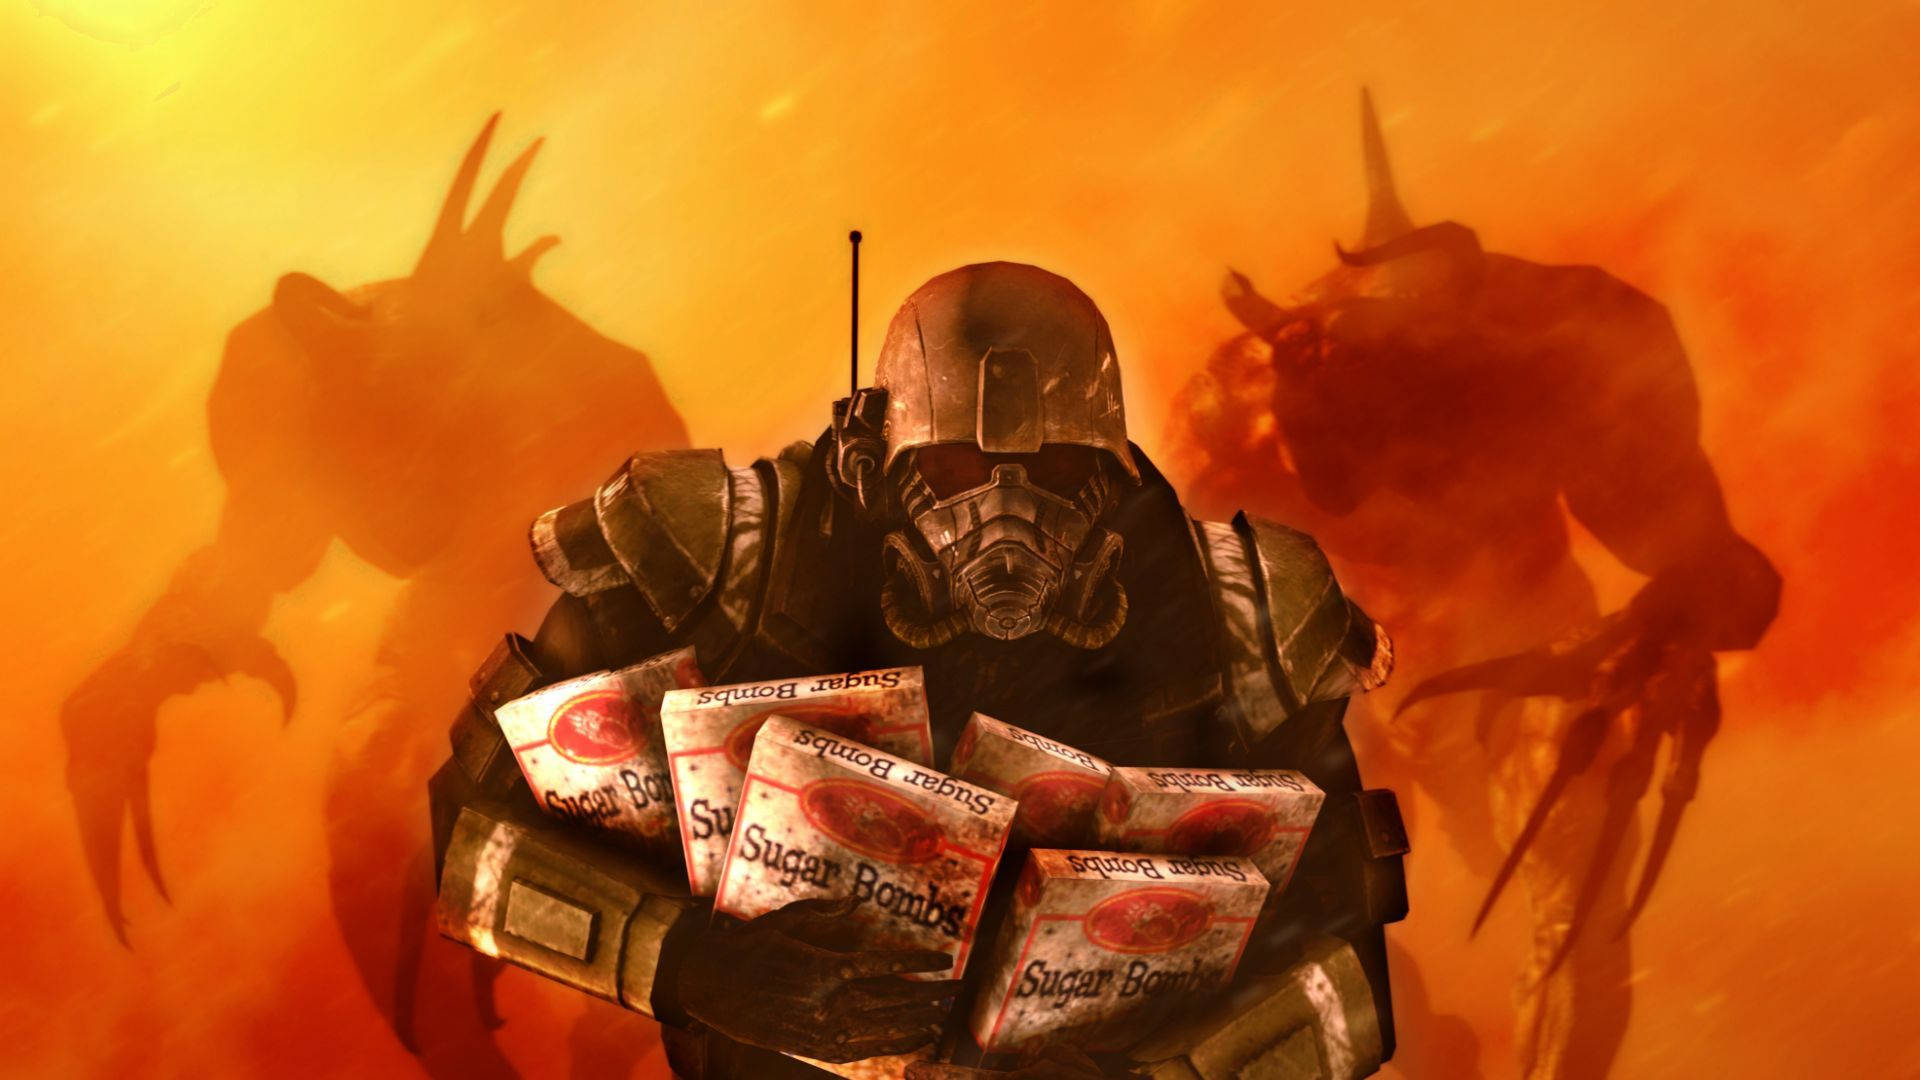 Fallout New Vegas Courier Sugar Bombs